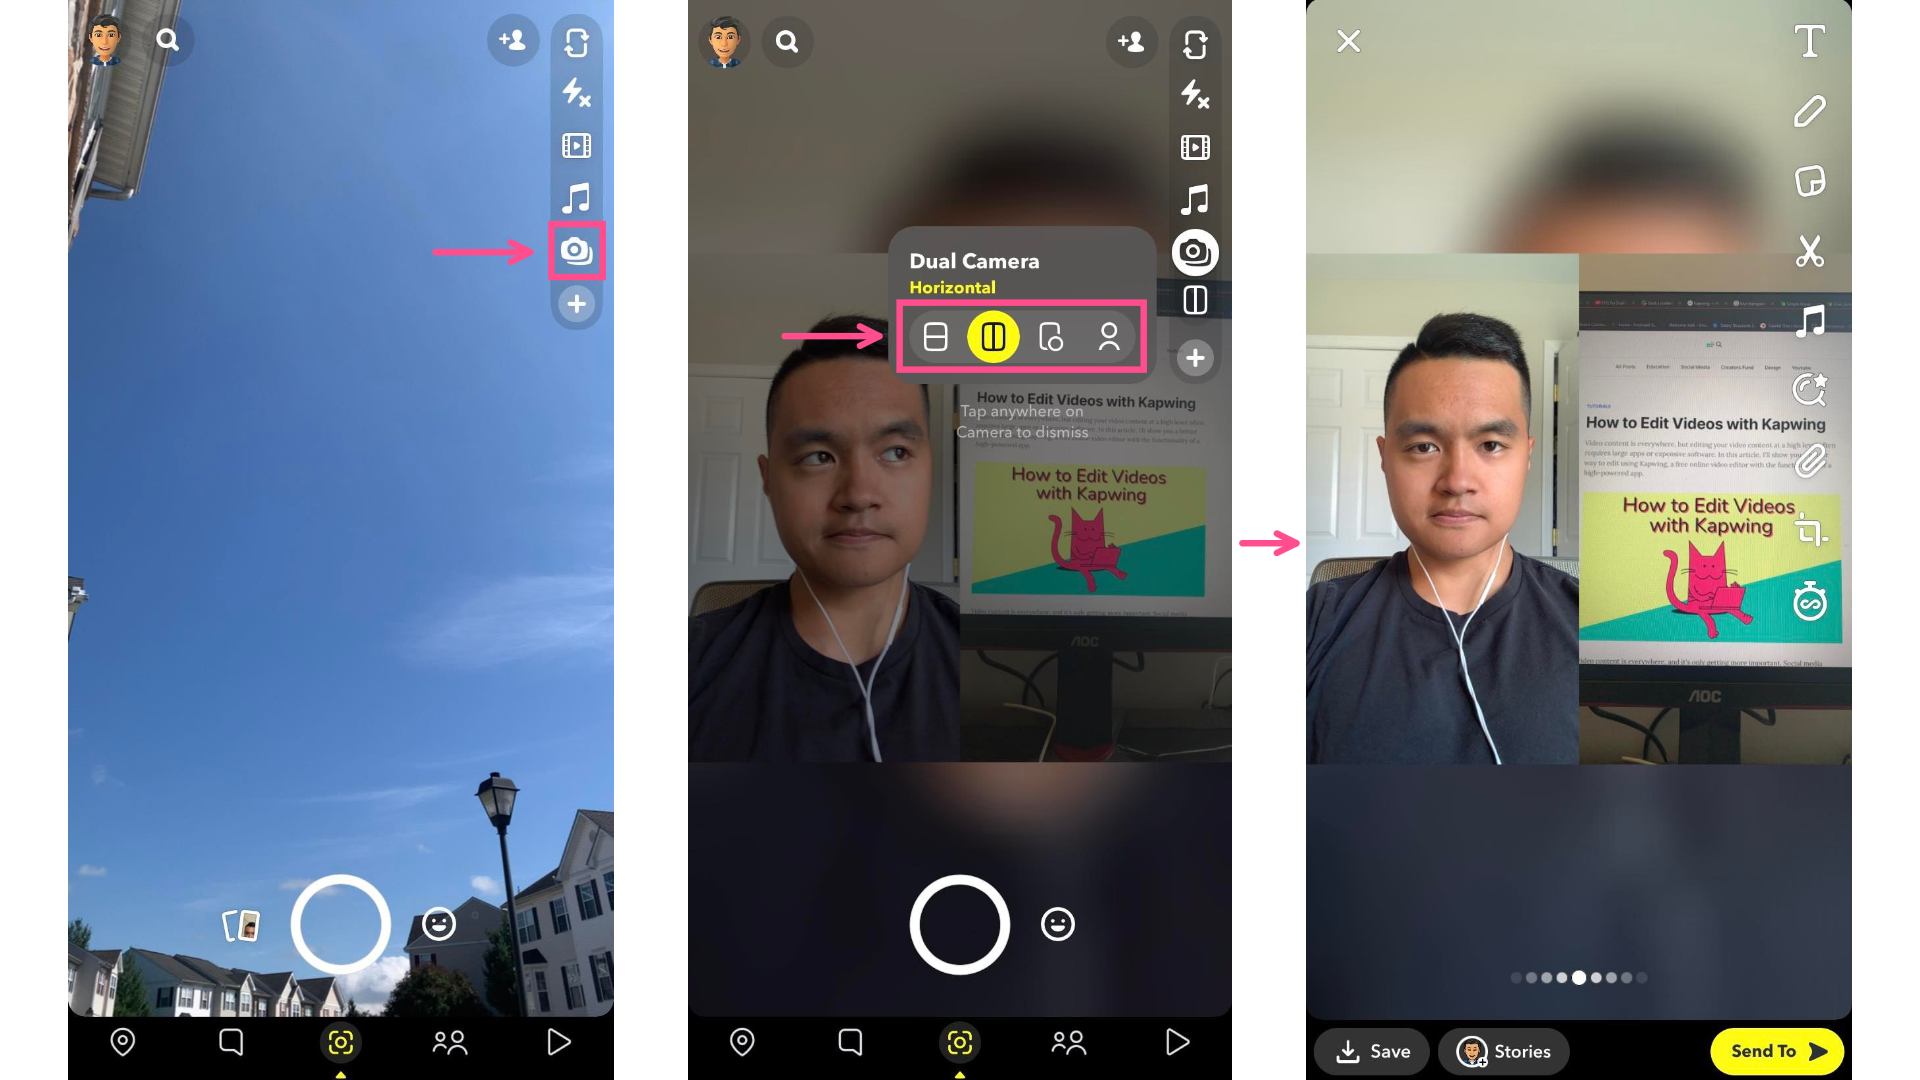 How to Use Dual Camera Mode in Snapchat